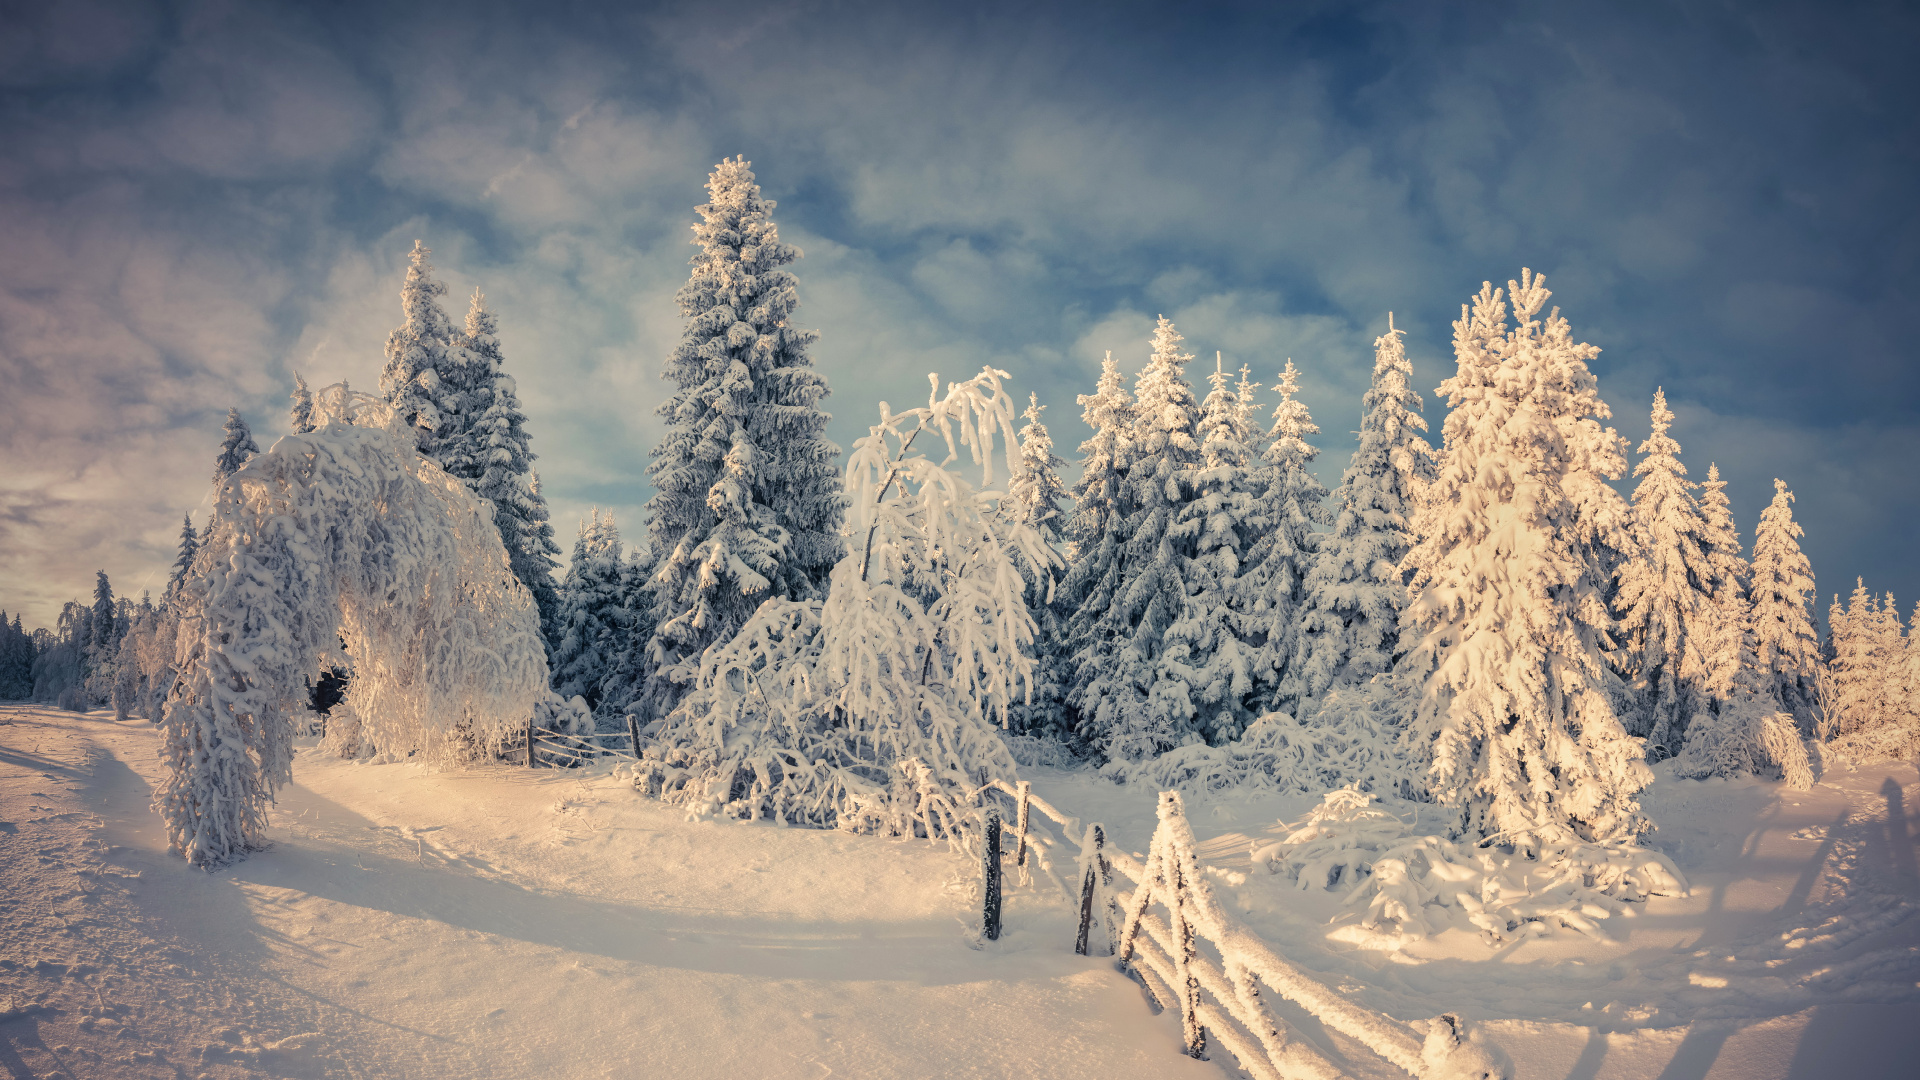 Snow Covered Trees and Mountains During Daytime. Wallpaper in 1920x1080 Resolution